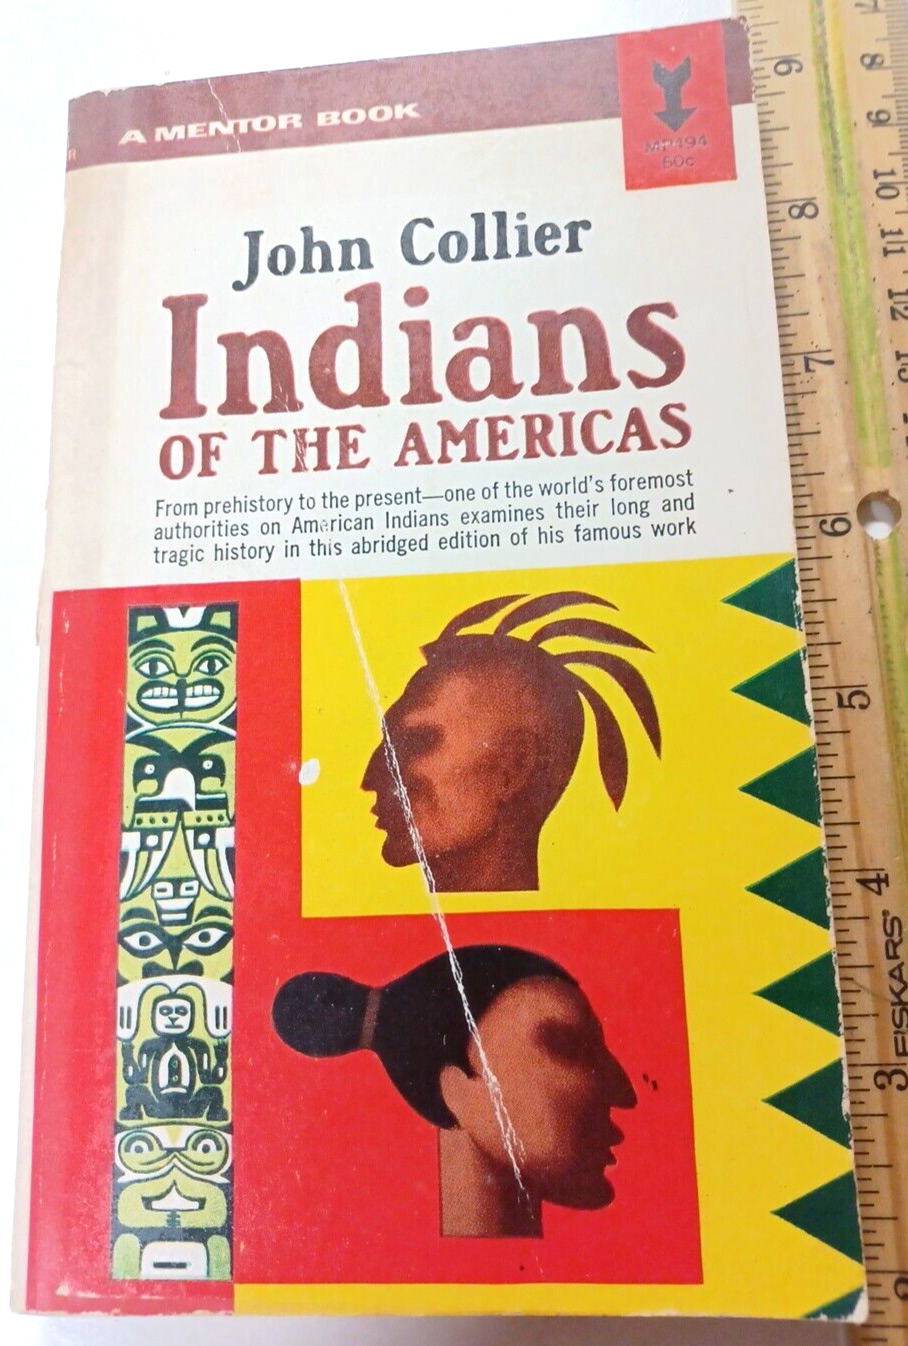  Indians of the americas by John Collier 